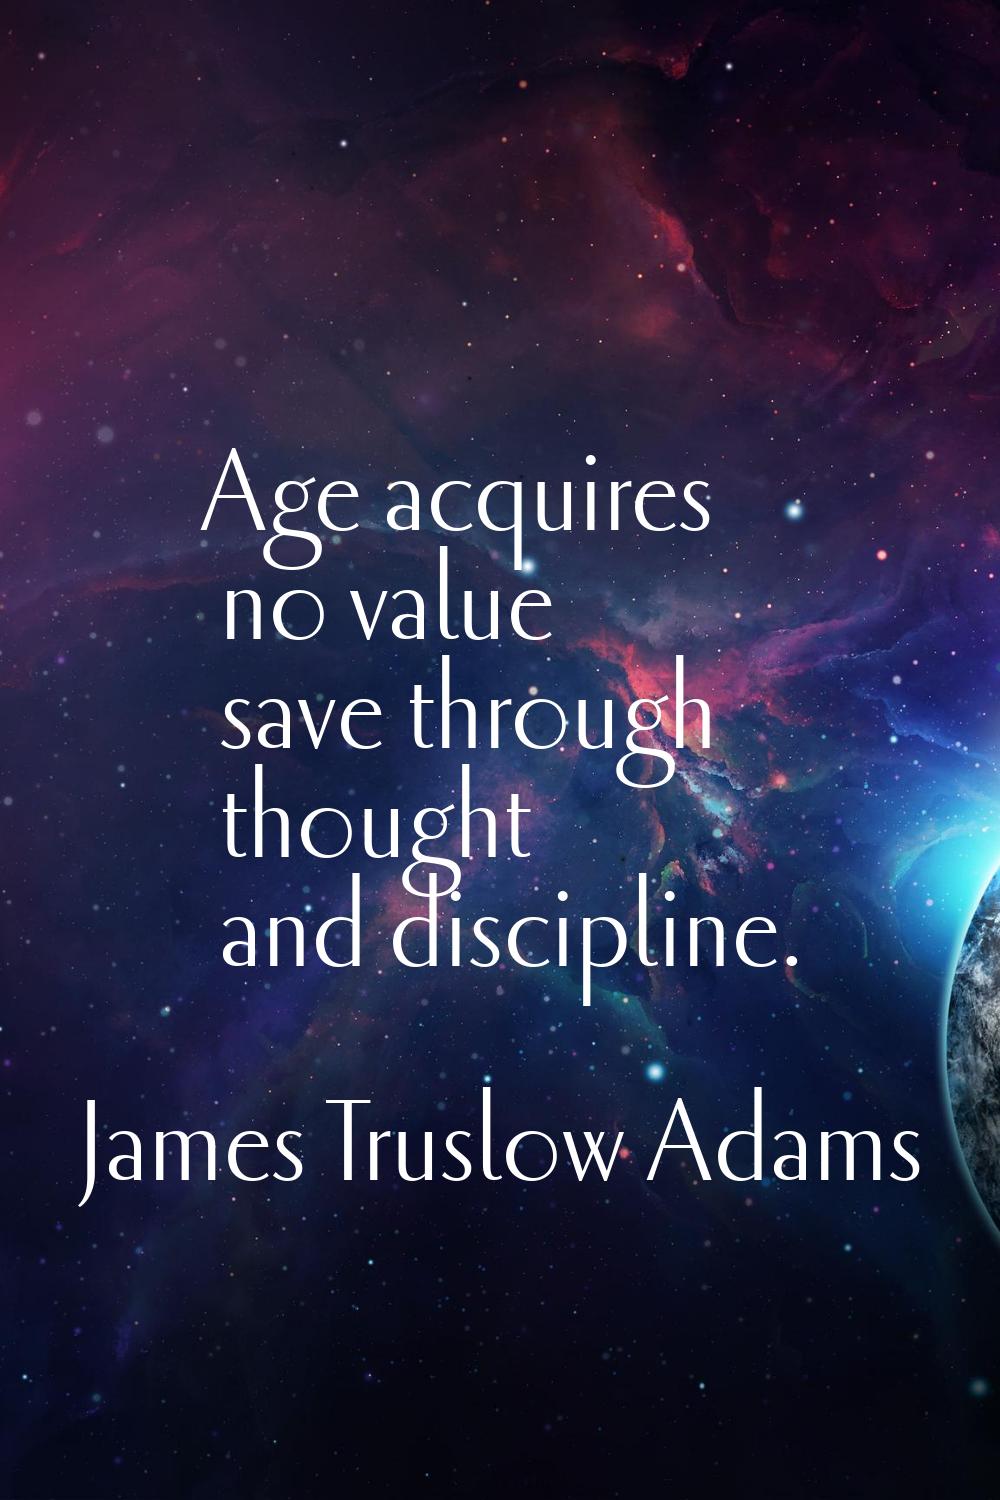 Age acquires no value save through thought and discipline.